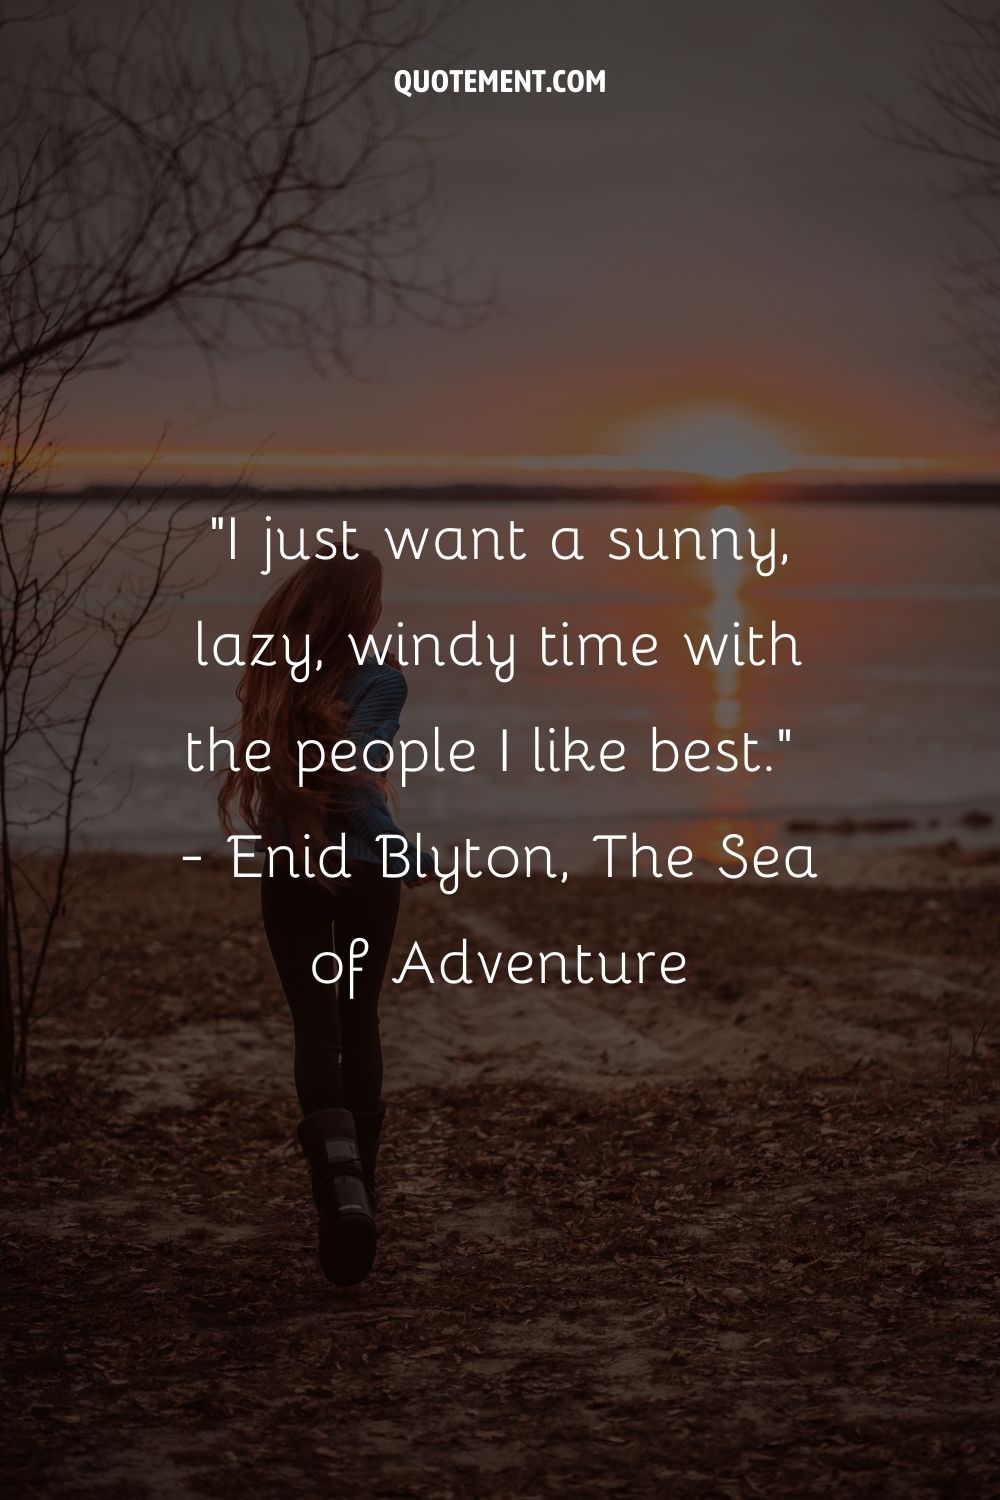 I just want a sunny, lazy, windy time with the people I like best.